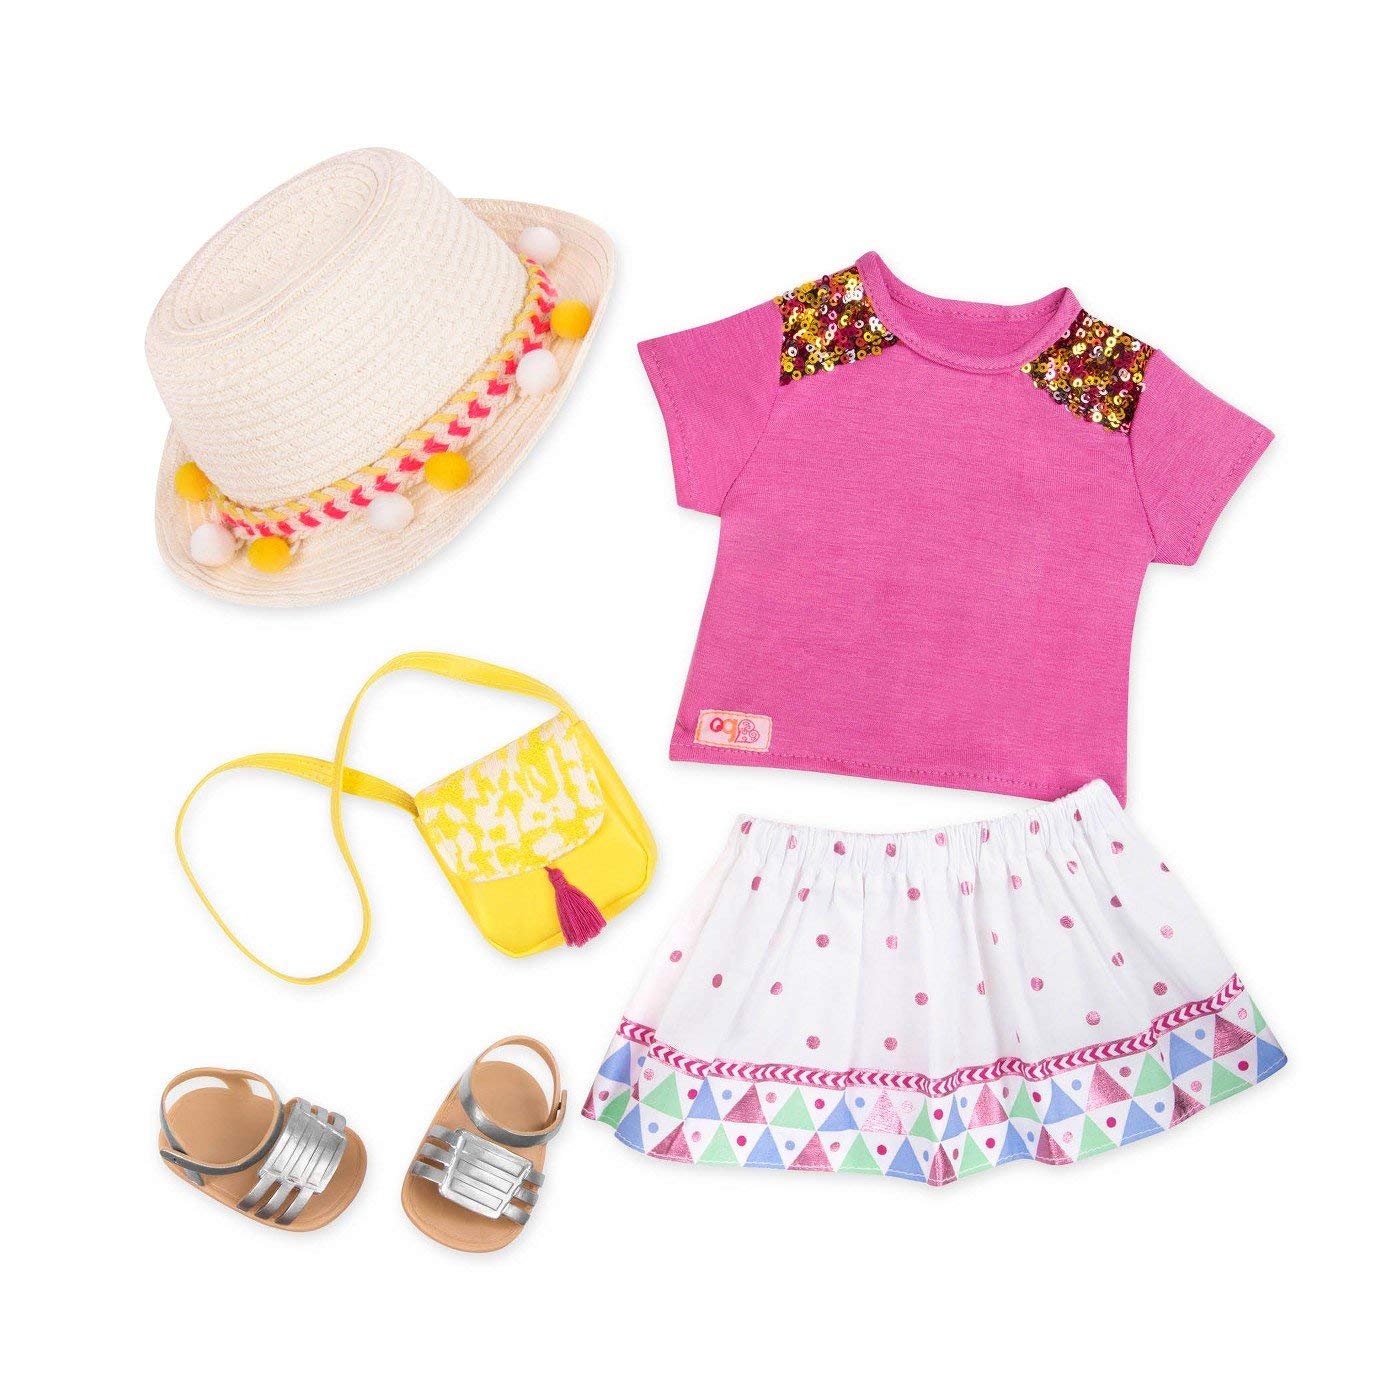 Ba Og 30438 Deluxe Tourist Outfit Our Generation-Multicolor 